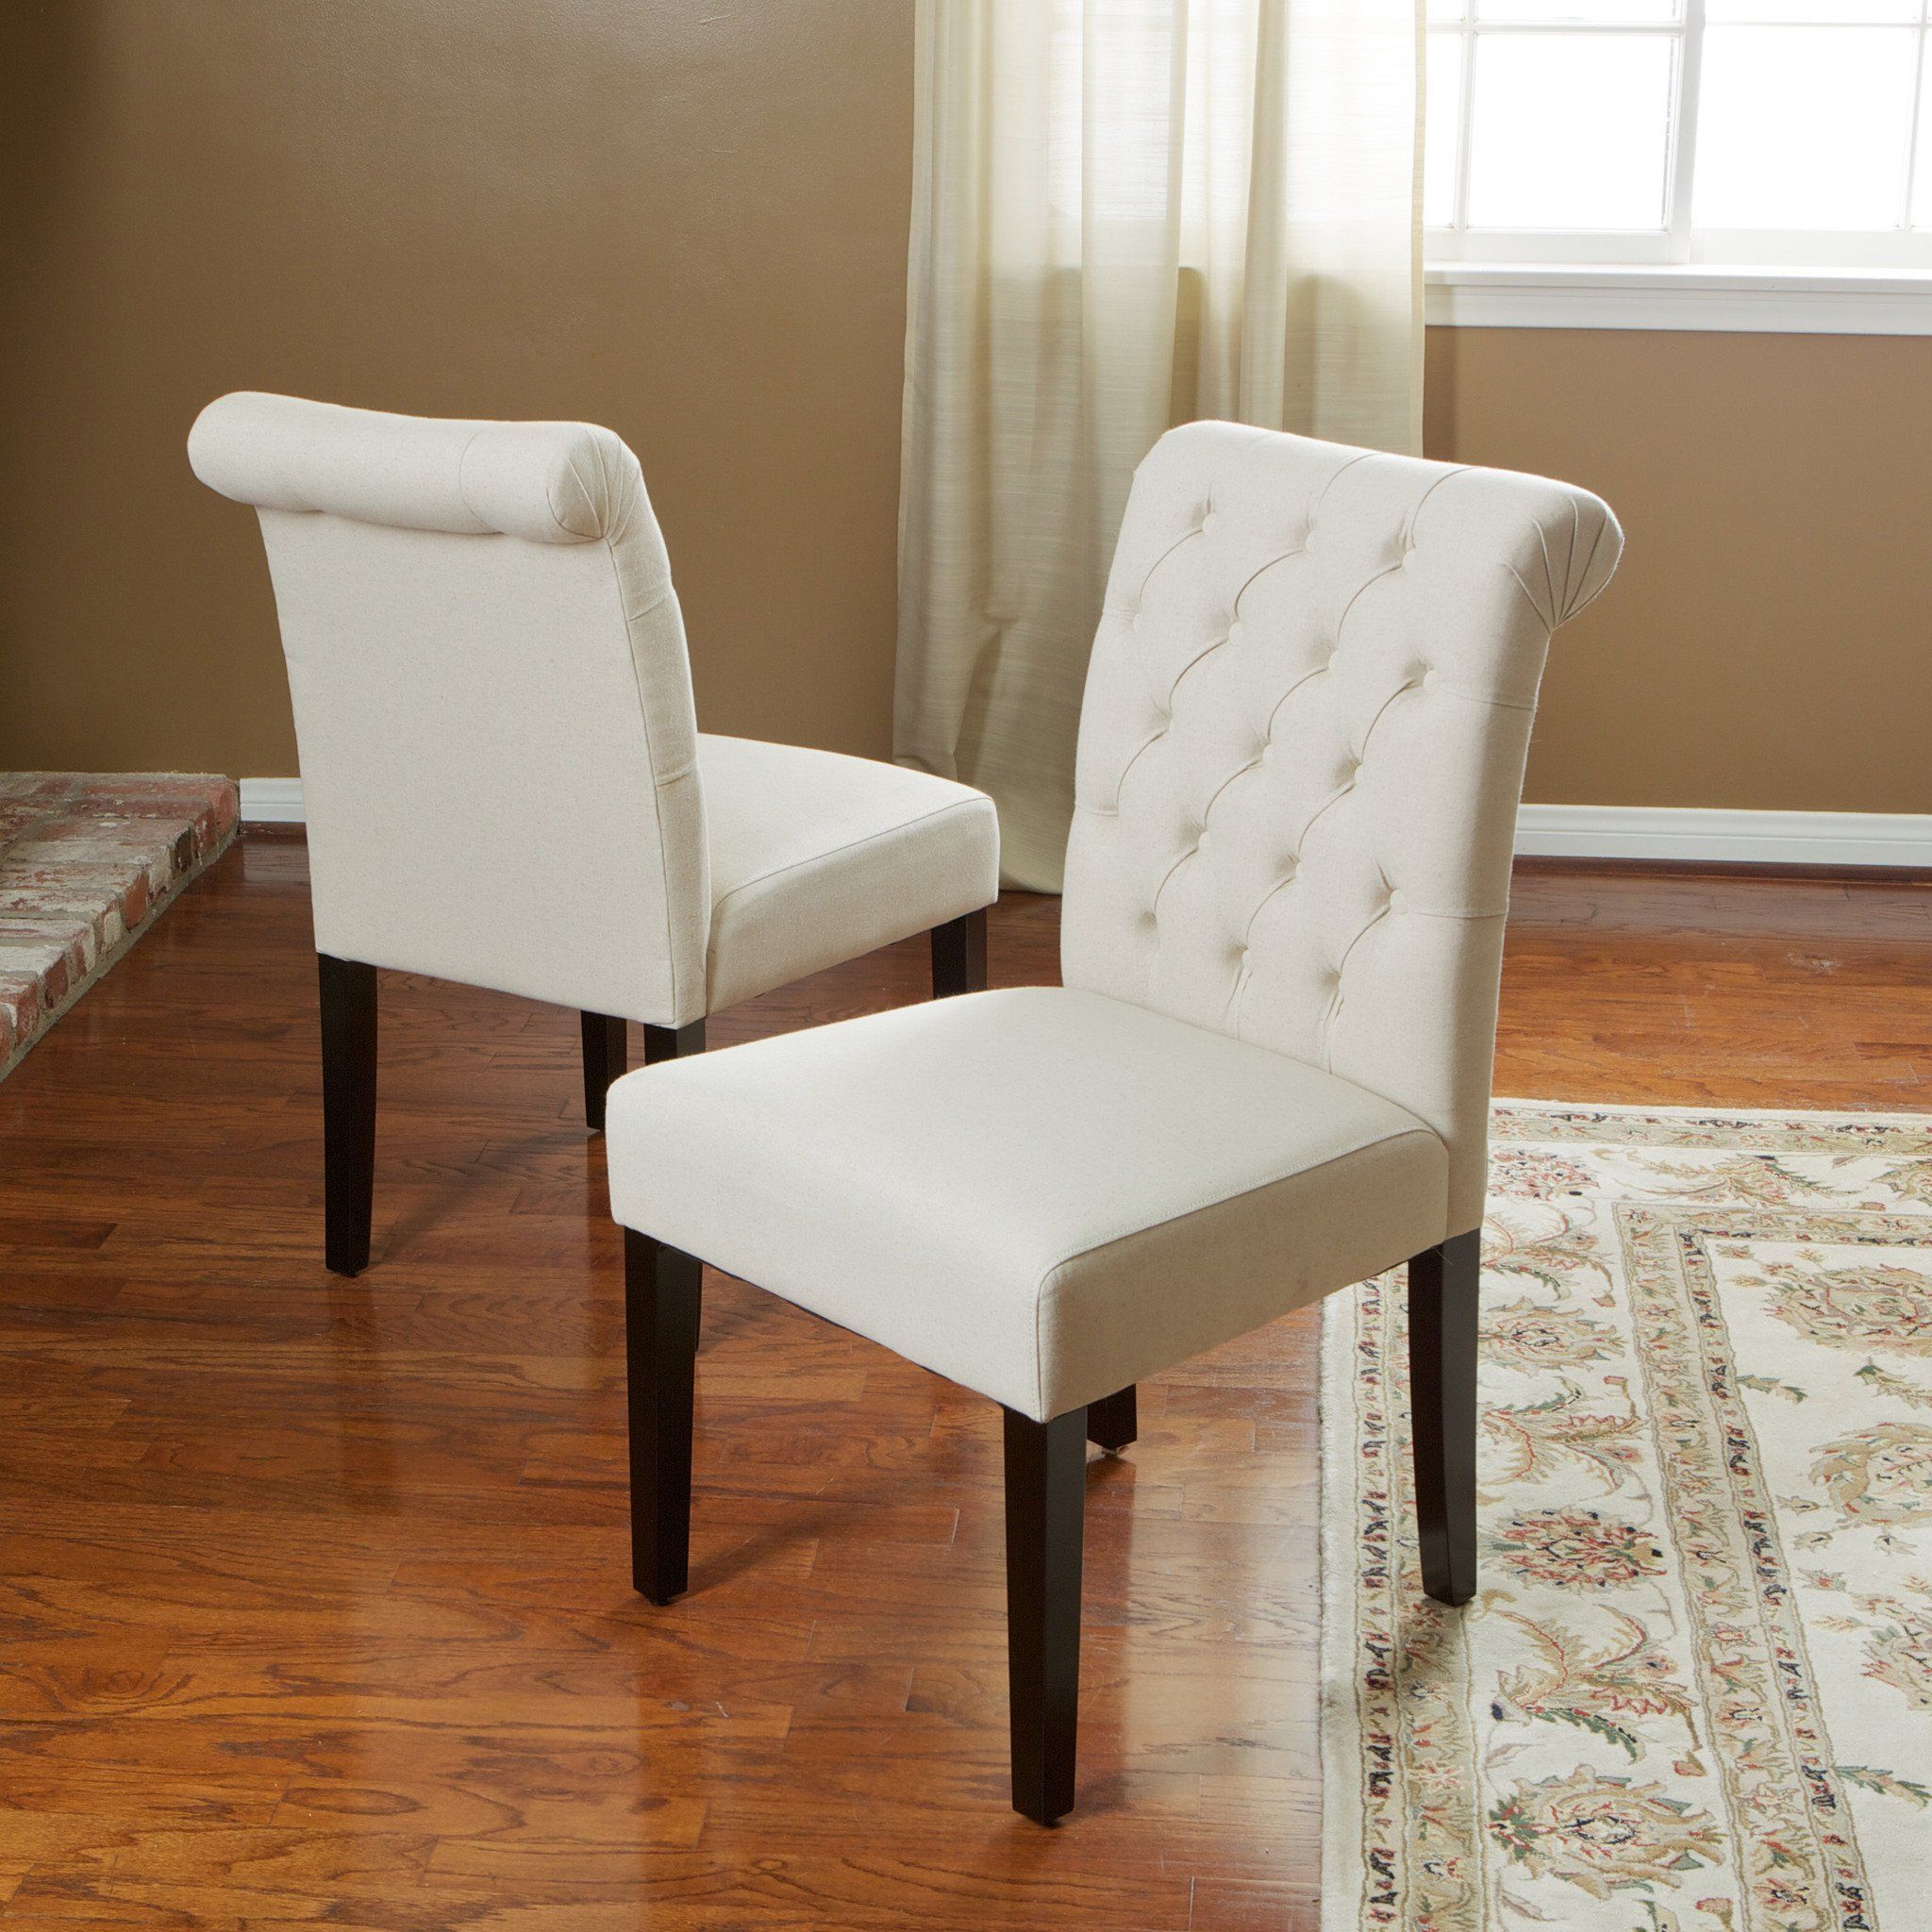 Elmerson Tufted Ivory Fabric Dining Chair (set Of 2) | Fabric Dining Throughout Ivory Button Tufted Vanity Stools (View 16 of 20)